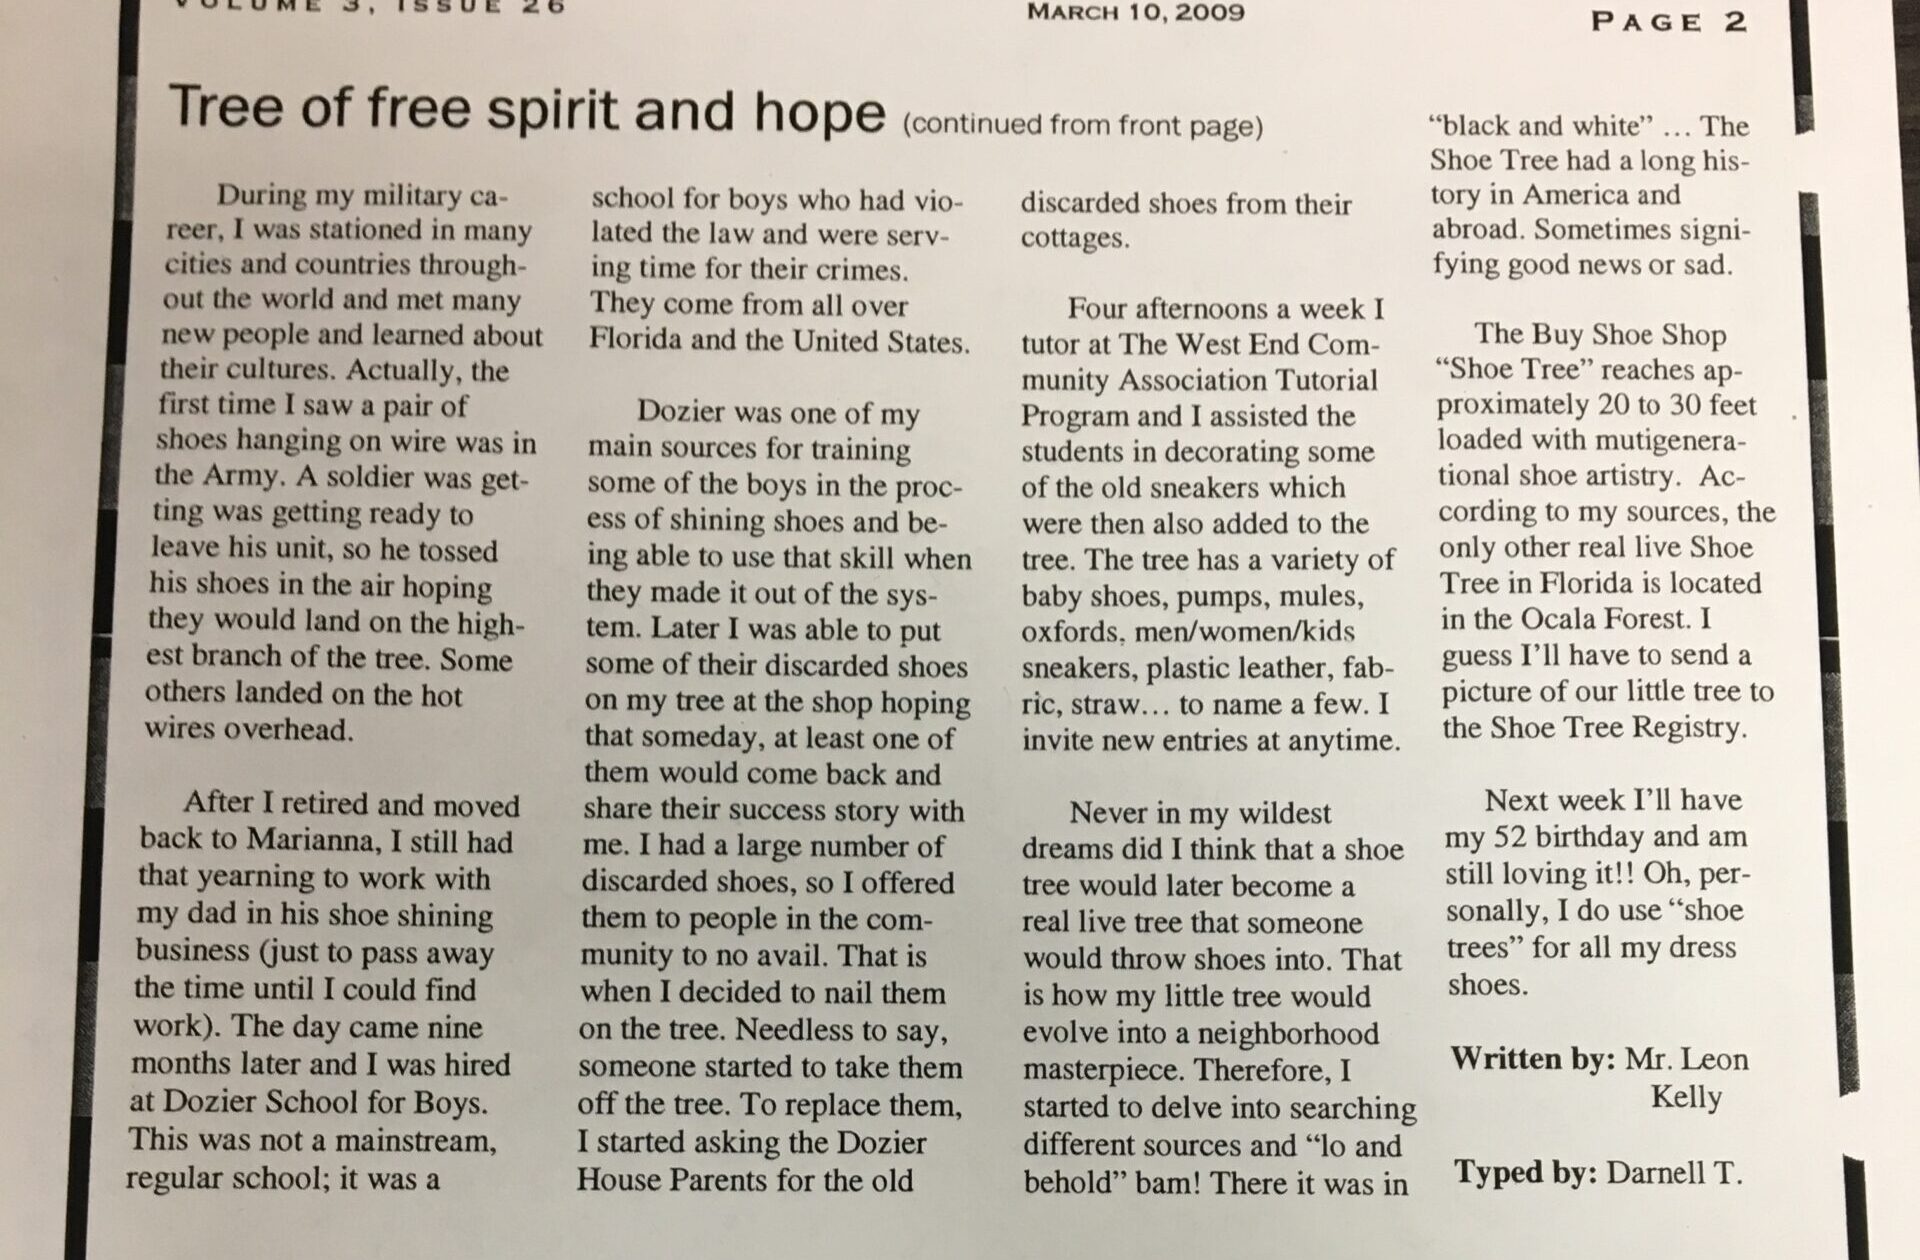 The Inside article on the Shoe Tree